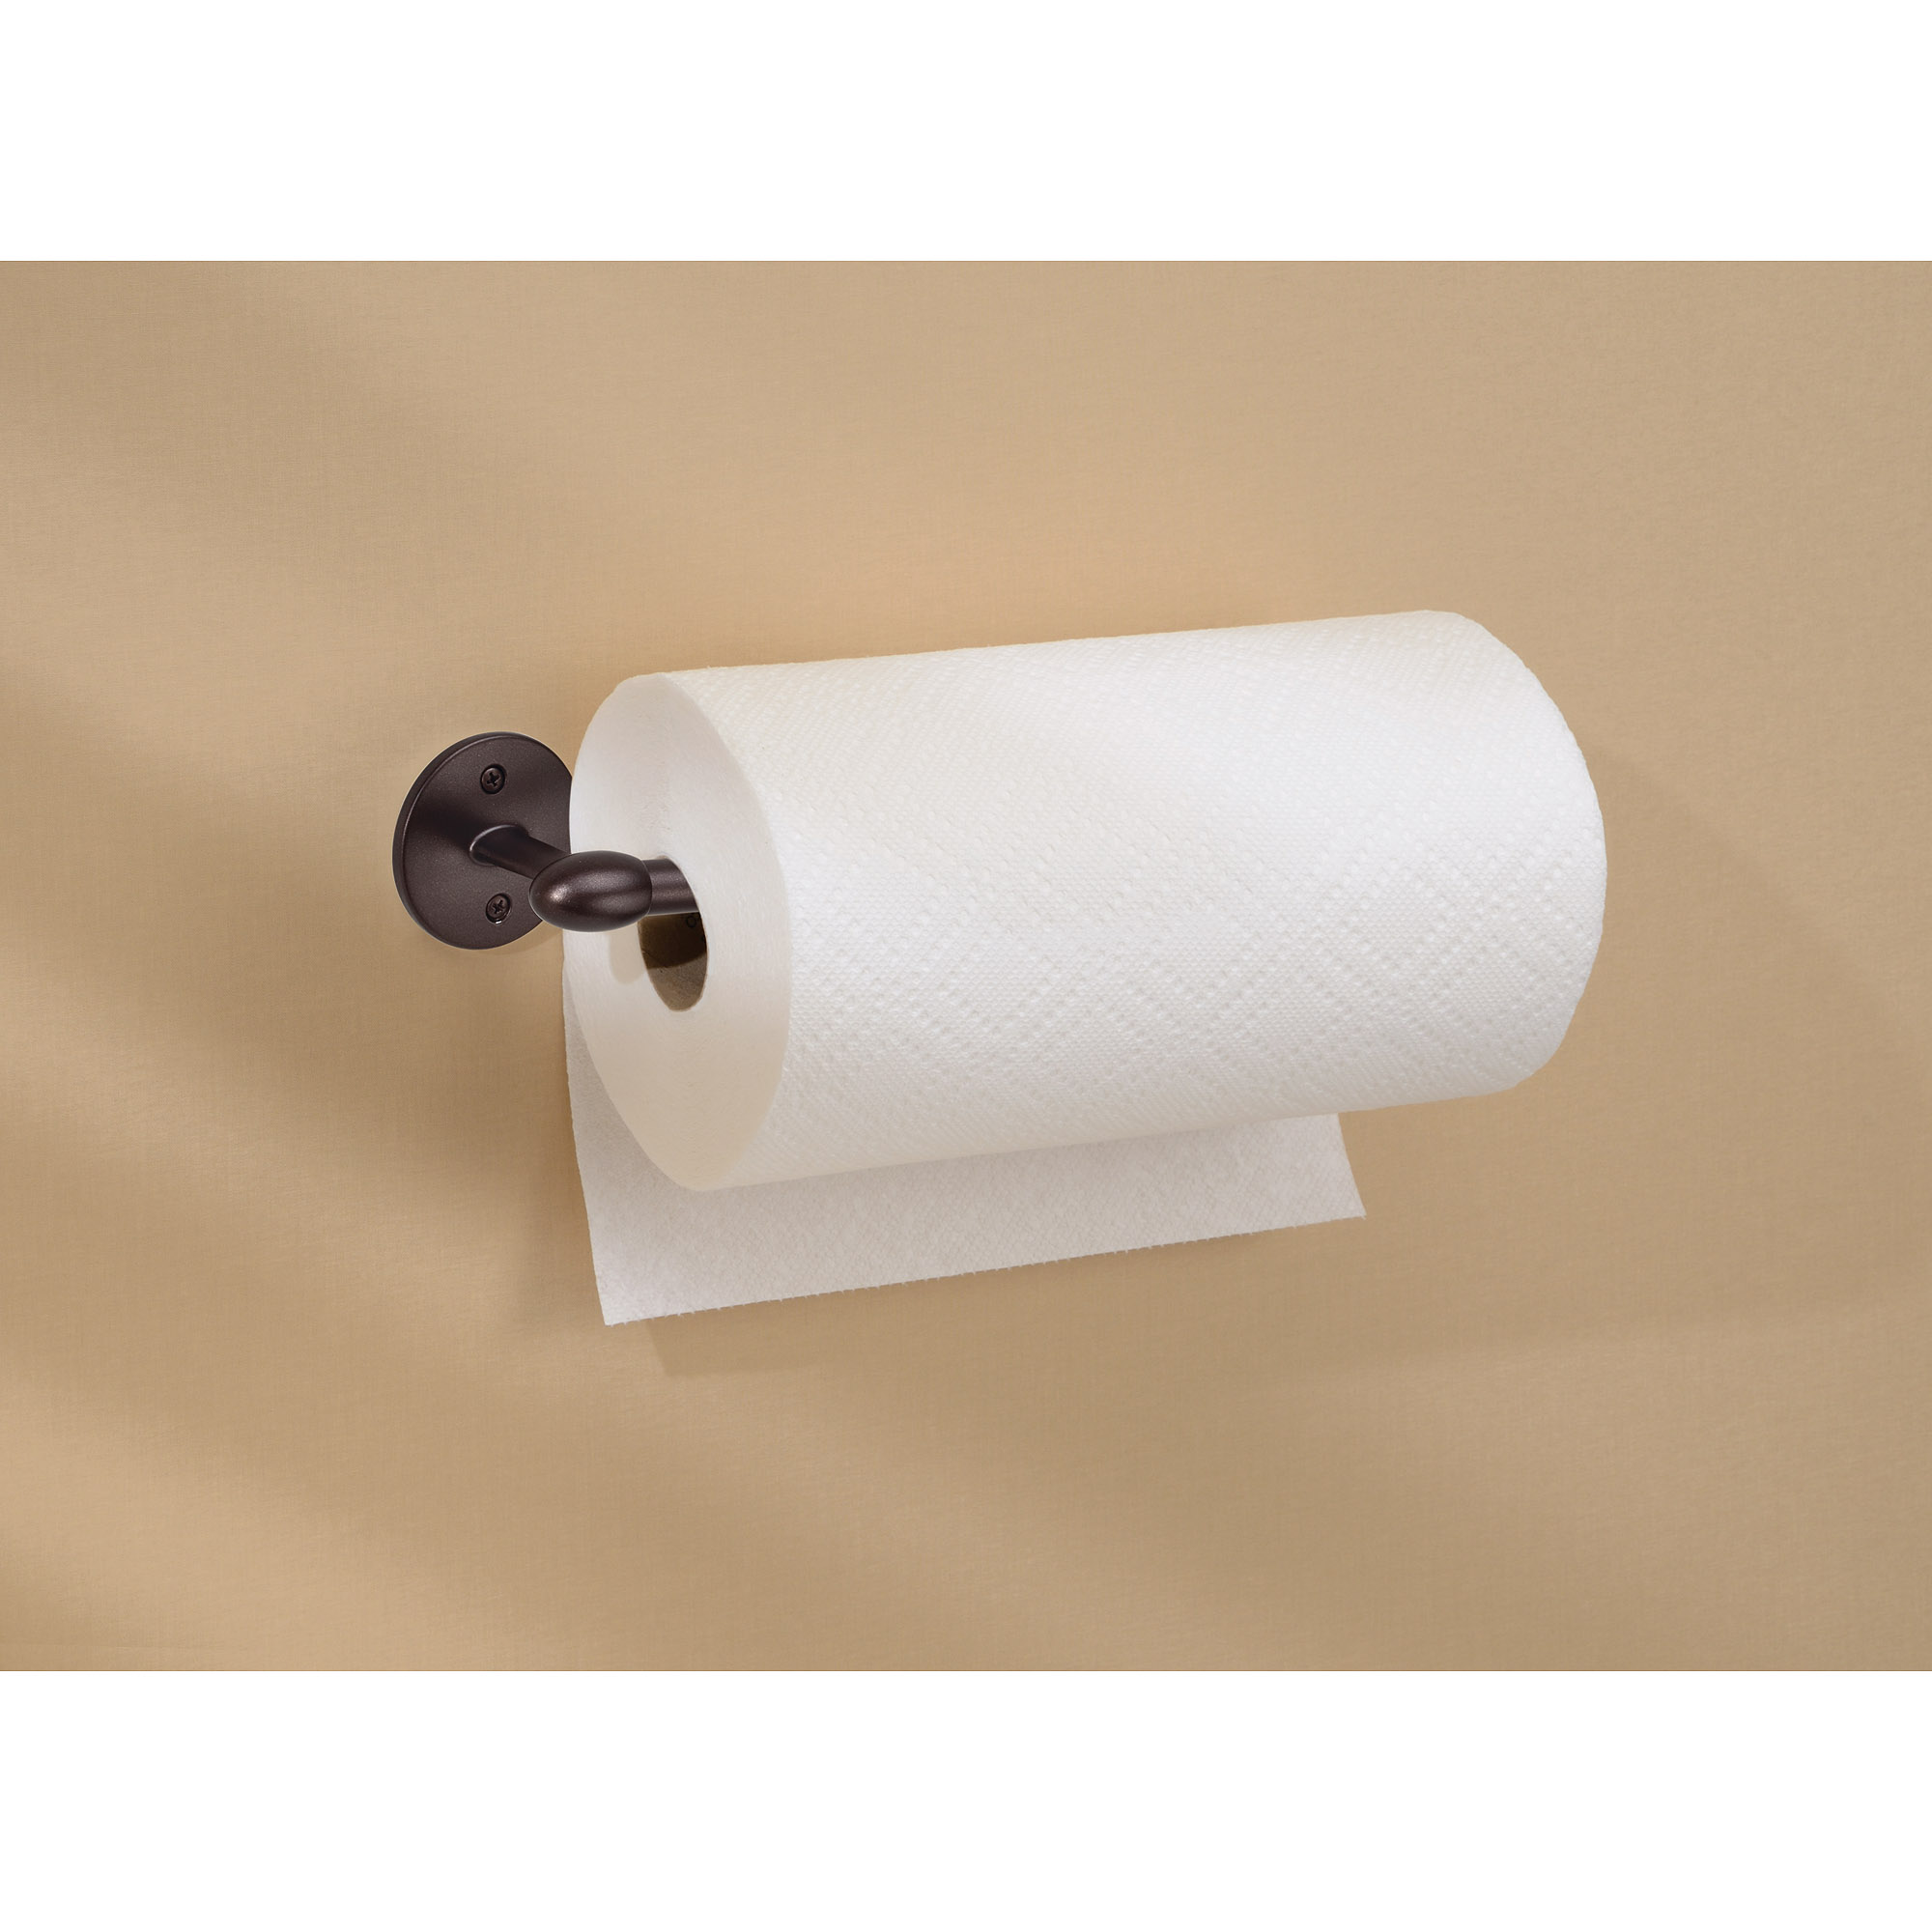 iDesign Orbinni Wall Mounted Paper Towel Holder - image 4 of 5